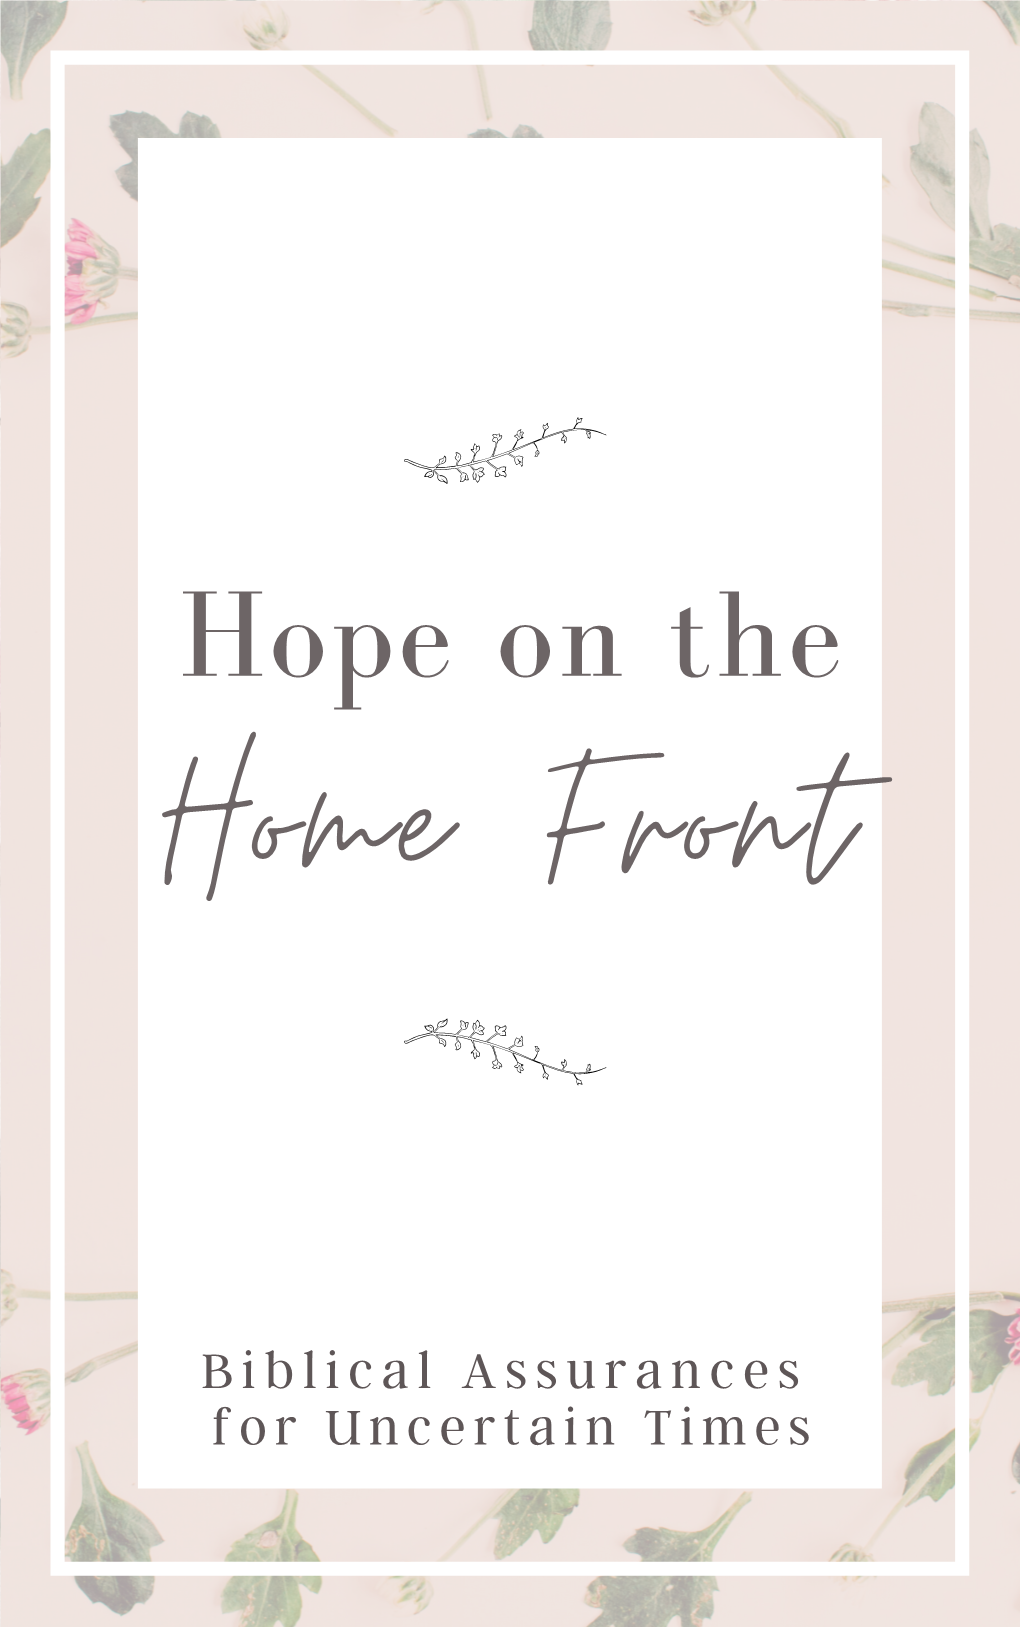 Download the Free PDF Hope on the Home Front Here!